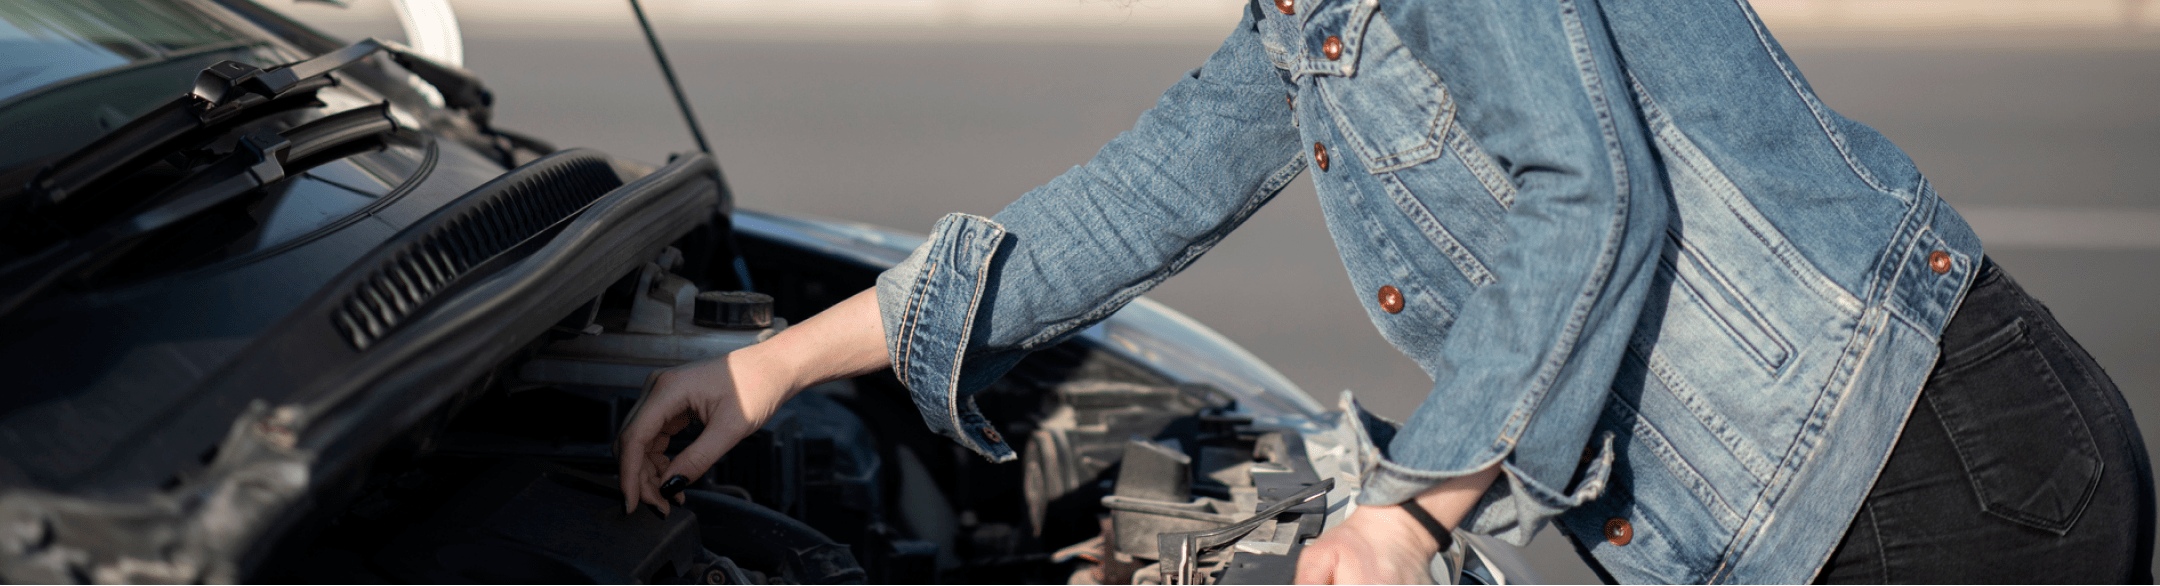 Woman in jean jacket checking engine under hood of a car